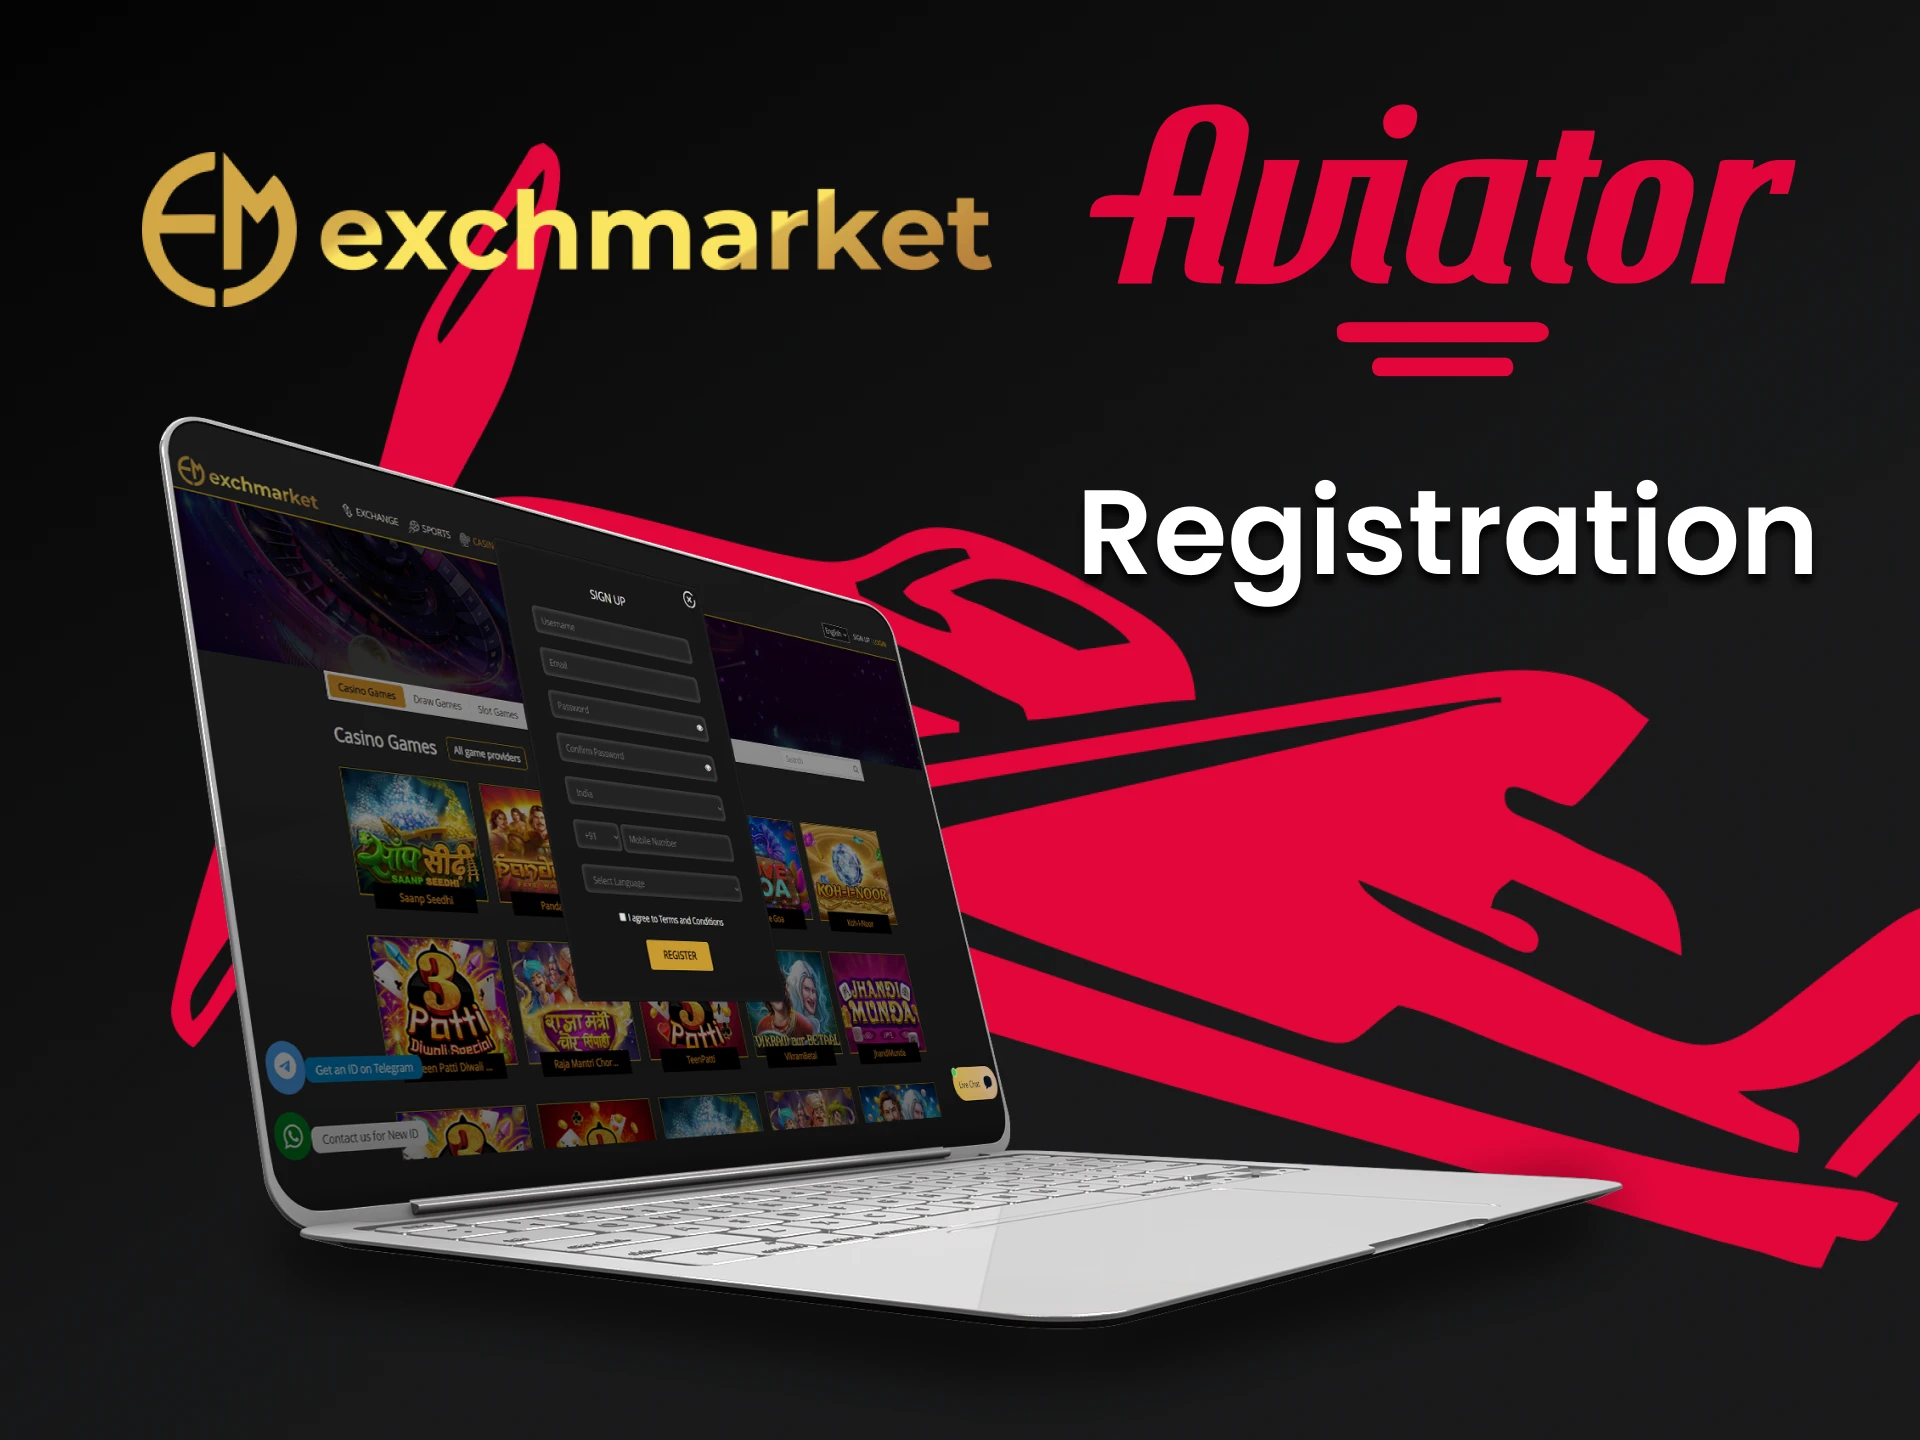 Create an account on Exchmarket for Aviator.